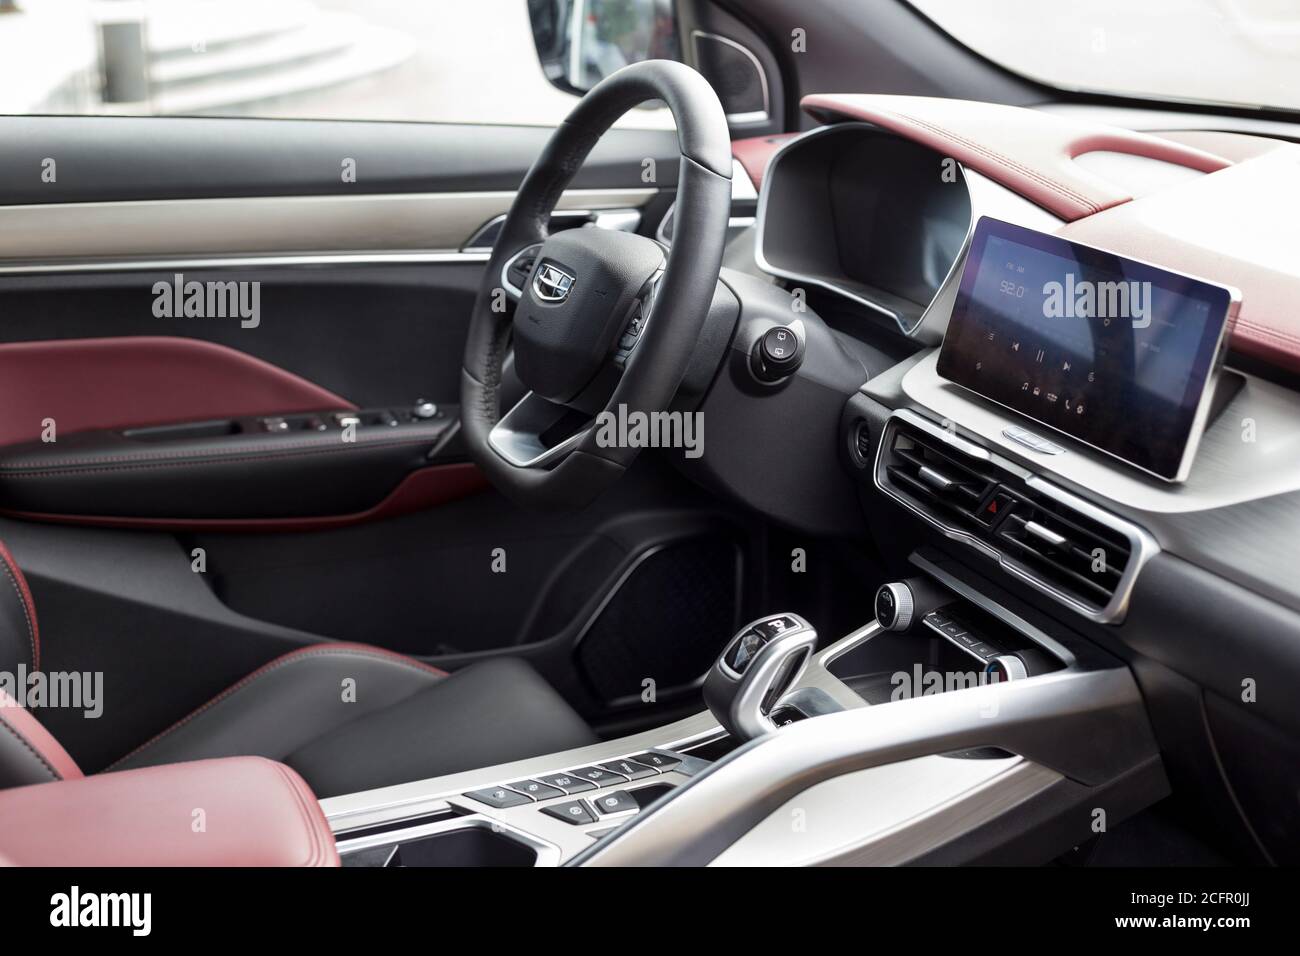 Russia, Izhevsk - August 14, 2020: Geely showroom. Interior of new modern CoolRay with black and red leather trim. Car manufacturer from China. Stock Photo